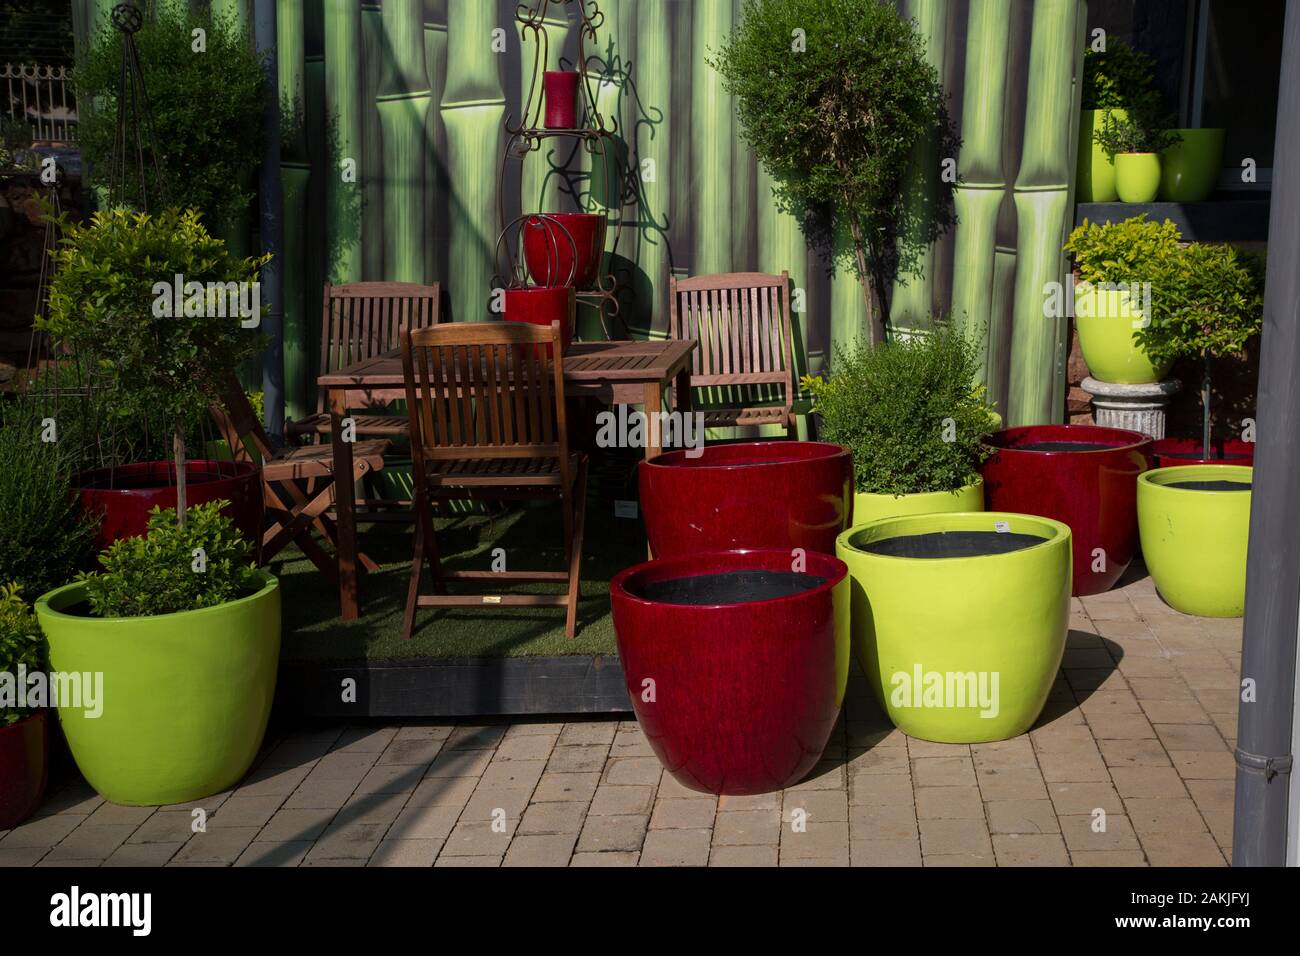 Colorful plant pots arranged in garden display Stock Photo